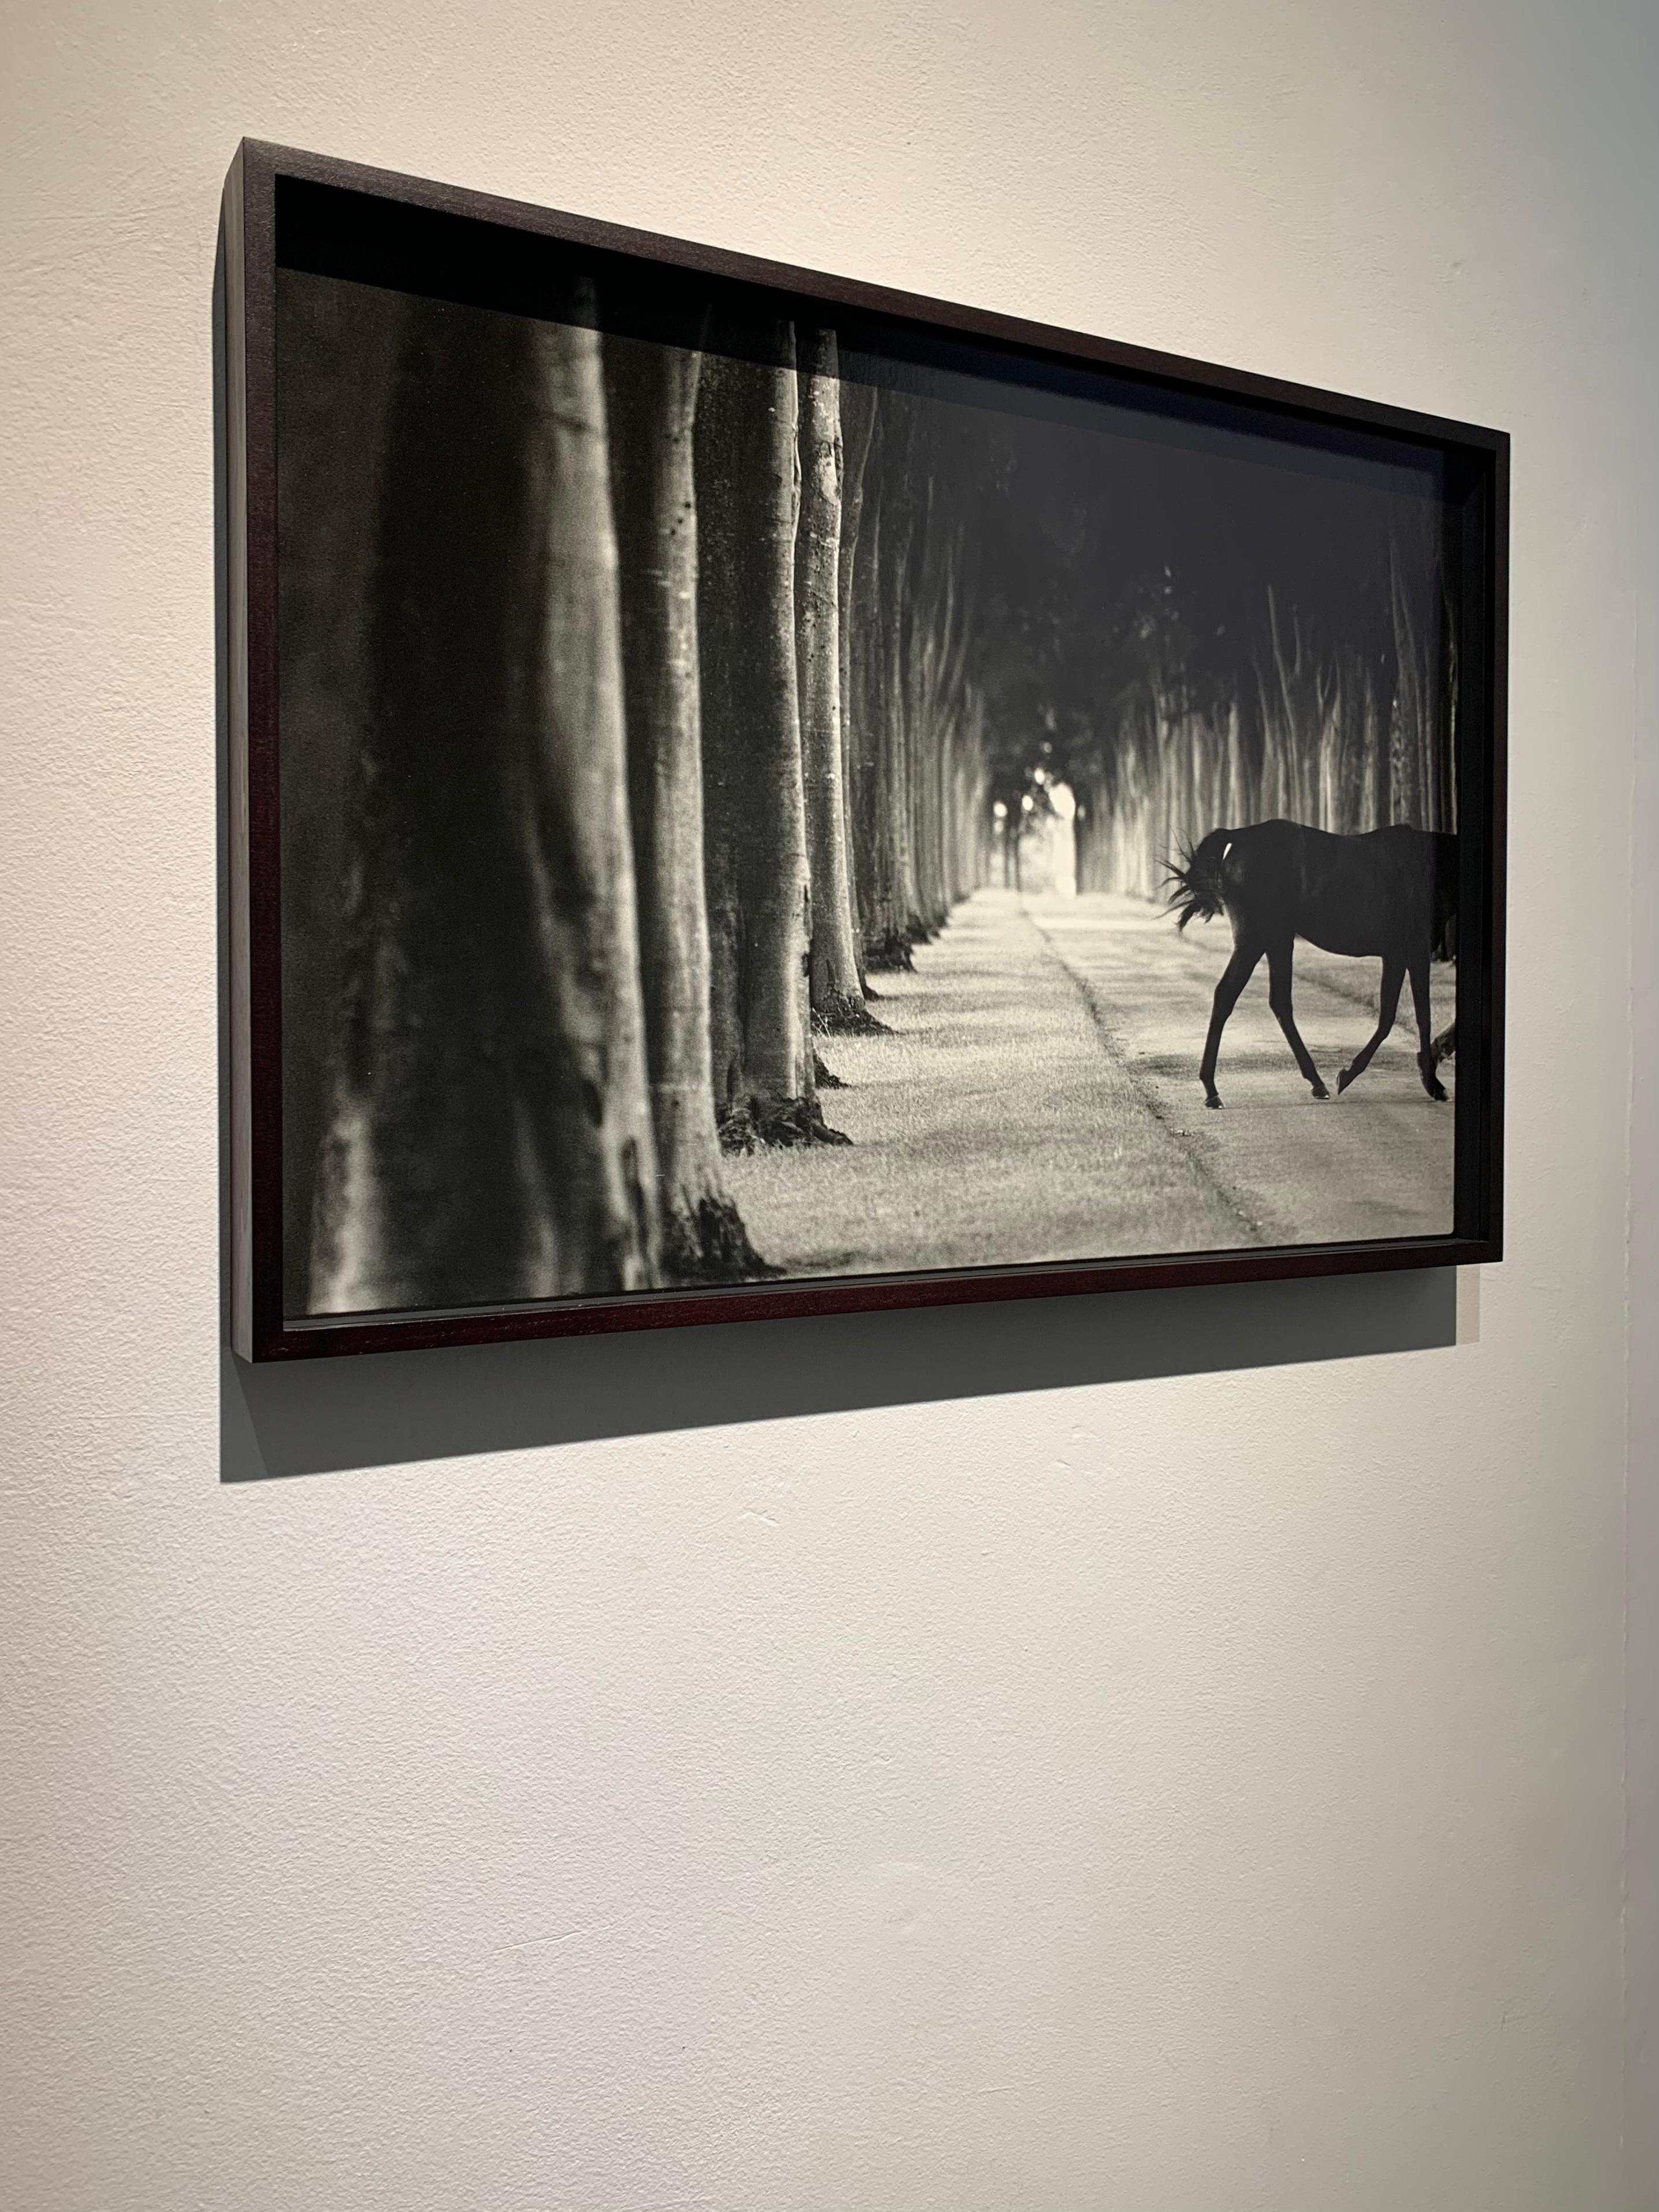 Kabool, 'Avenue of Trees’, 2001 by John Reardon
Edition of 15
Silver Gelatin Print, Mounted on Aluminium, Custom framed, UV protective Museum AR Glass

This piece is part of (after) Whistlejacket - Contemporary Equine Photographs exhibition at MMX